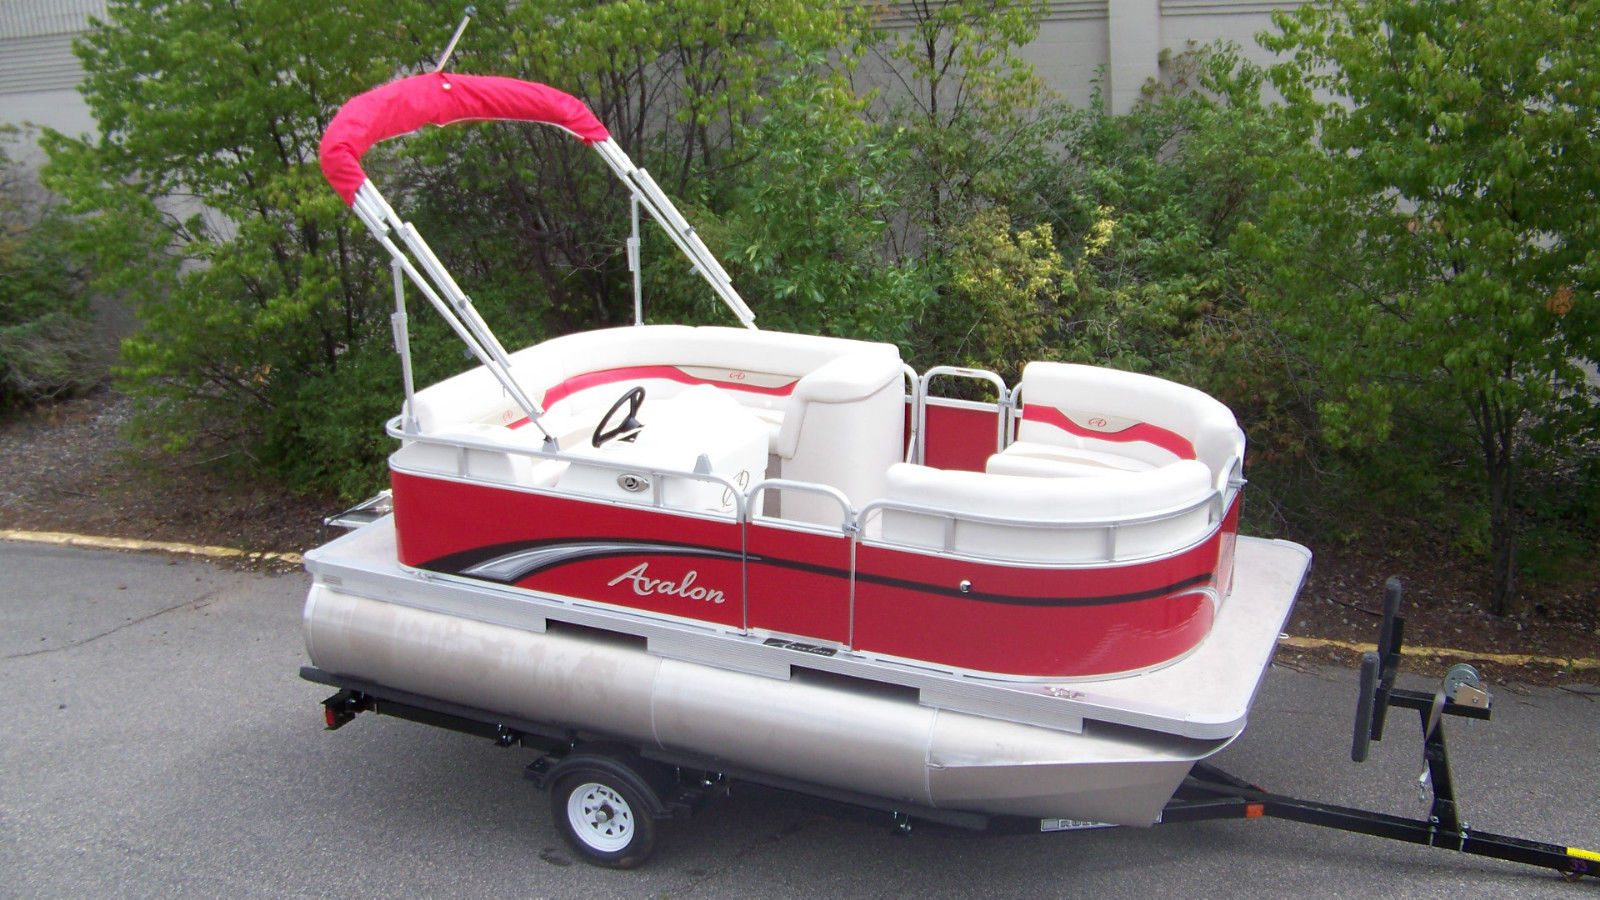 New 14 Ft High End Pontoon Boat With 9 9 4 Stroke 2014 For Sale For 11 999 Boats From Usa Com